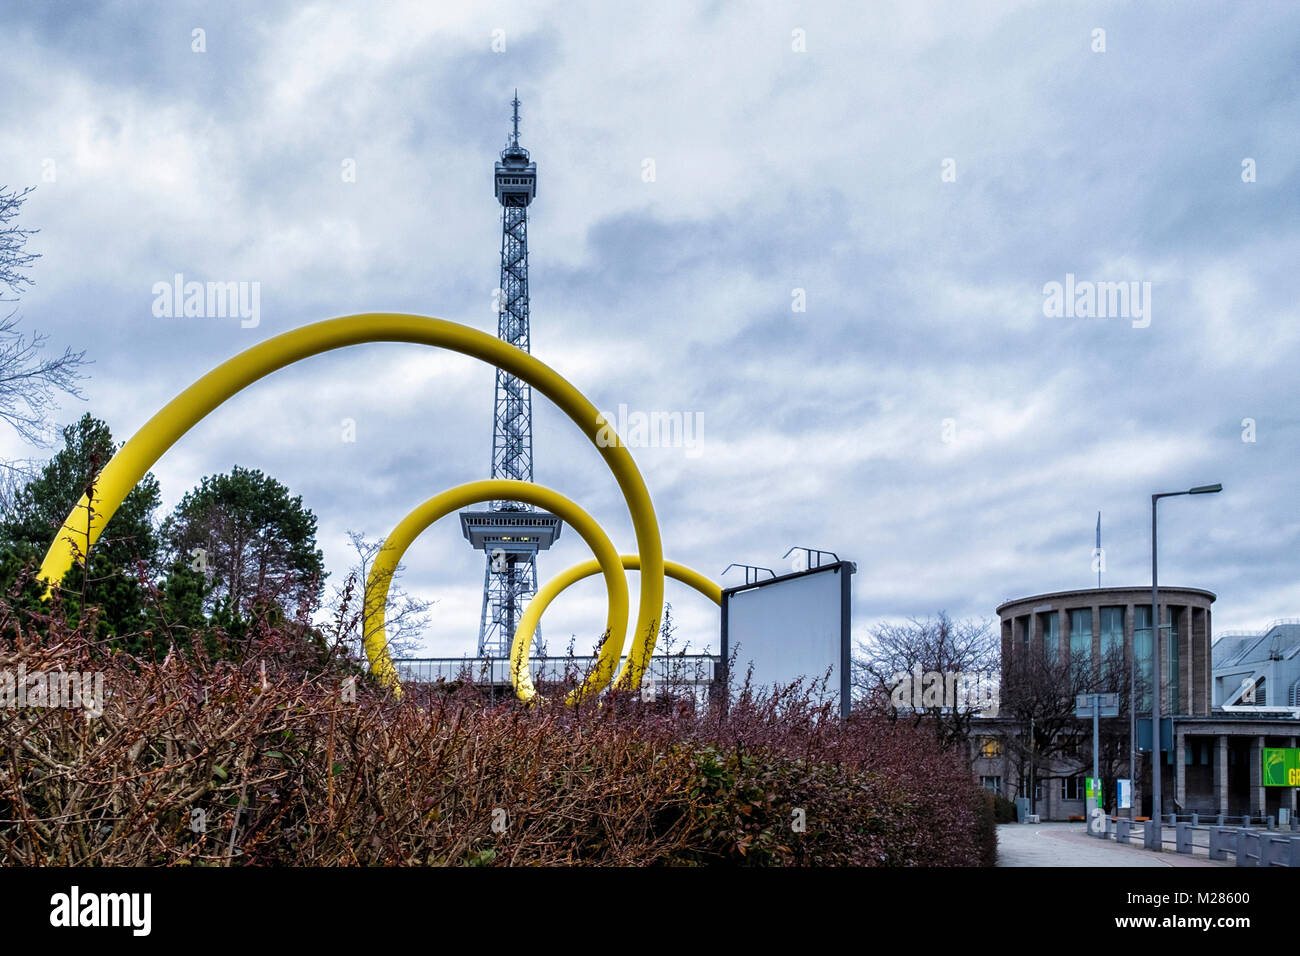 Berlin Funkturm Radio Tower. Former broadcasting tower with steel framework Looping 1992 by Ursula Sax and Rotunda 16 Stock Photo